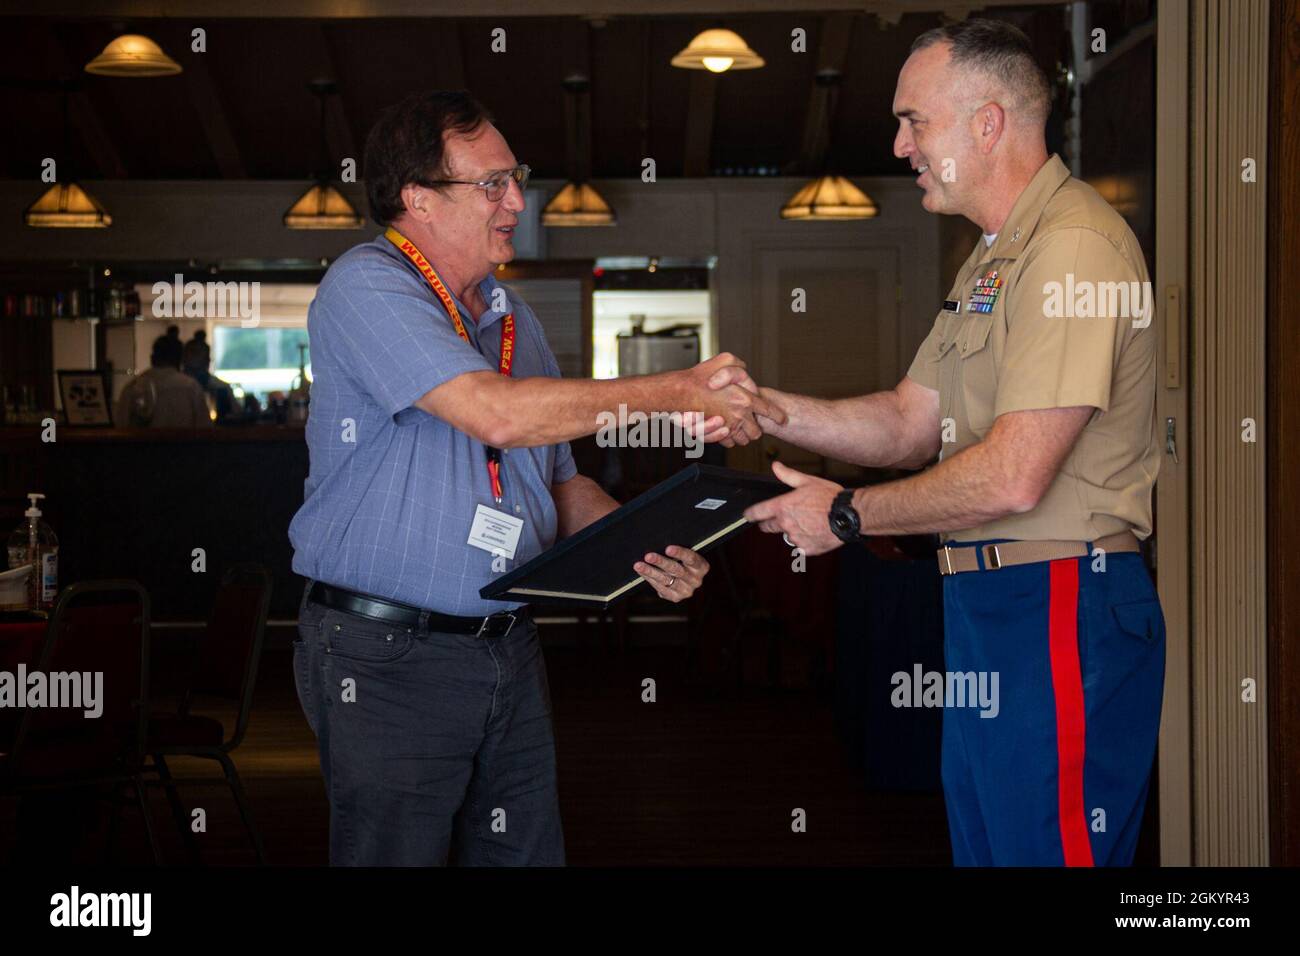 U.S. Marine Corps Col. James B. Conway, the commanding officer for the 12th Marine Corp District, awards Scott Phillips, a military entrance processing station liaison, native to El Segundo, California, during the Educator's Workshop at Marine Corps Recruit Depot San Diego, California, July 30, 2021. The Educator's Workshop is a five-day program designed to better inform educators and influential figures about the benefits and opportunities available during service in the Marine Corps. This allows participants to return home and provide firsthand experience and knowledge to individuals interes Stock Photo